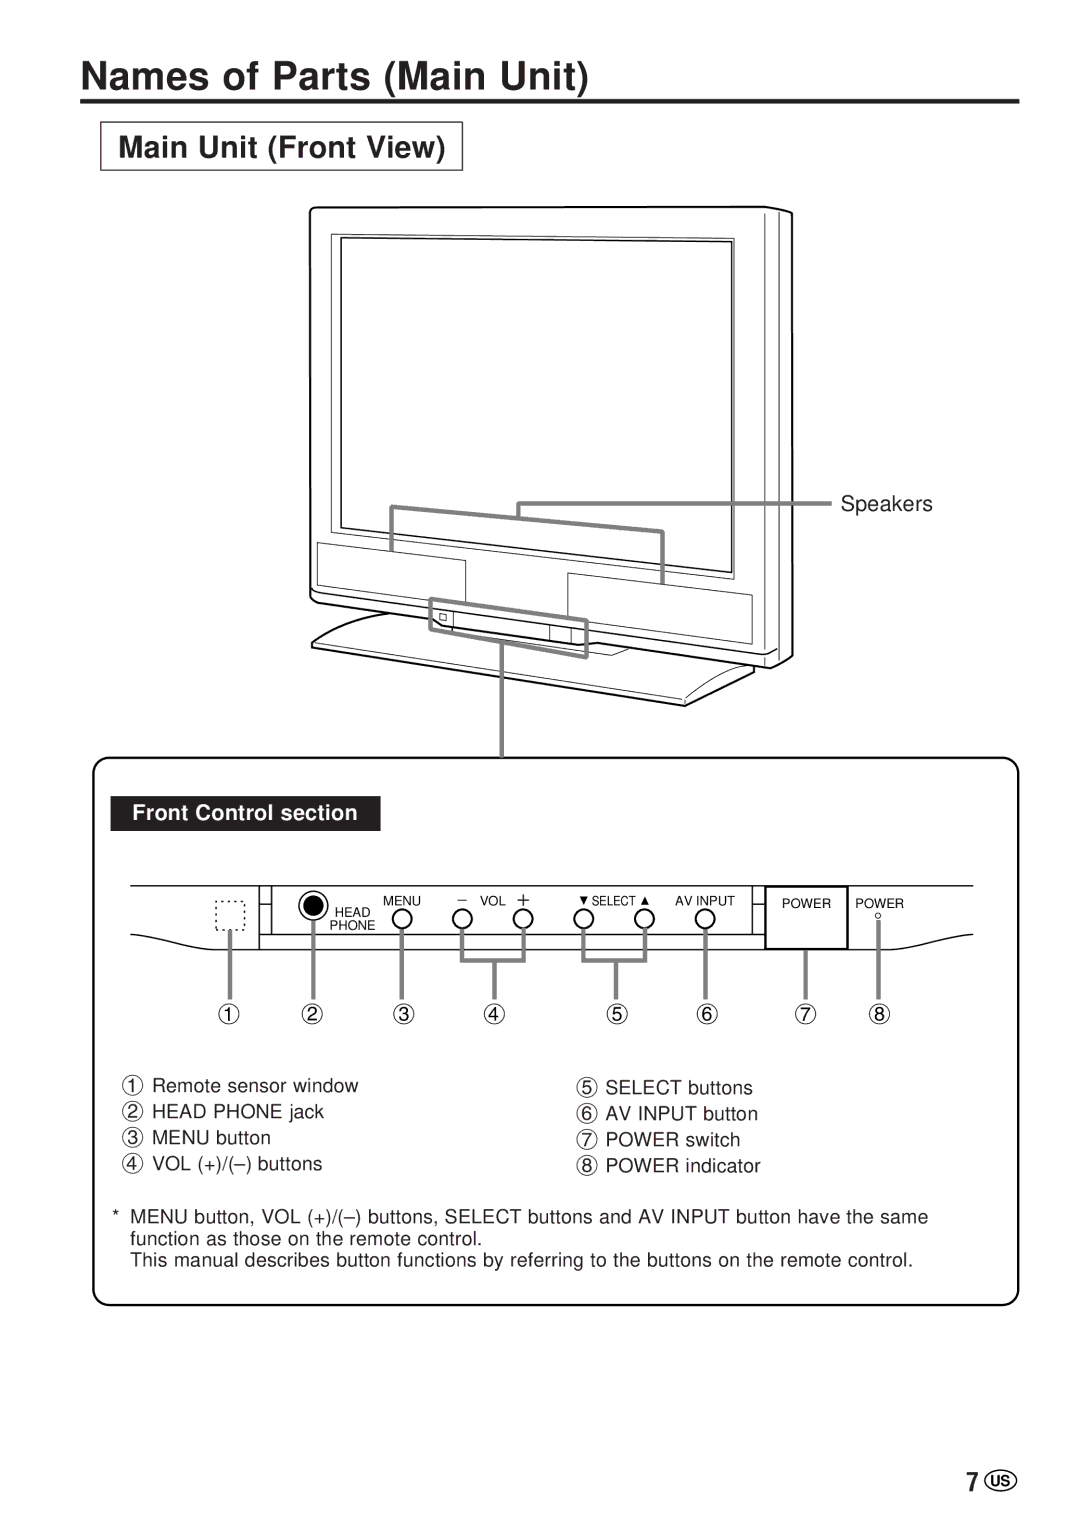 Sharp LC-20VM2 operation manual Names of Parts Main Unit, Main Unit Front View, Front Control section 